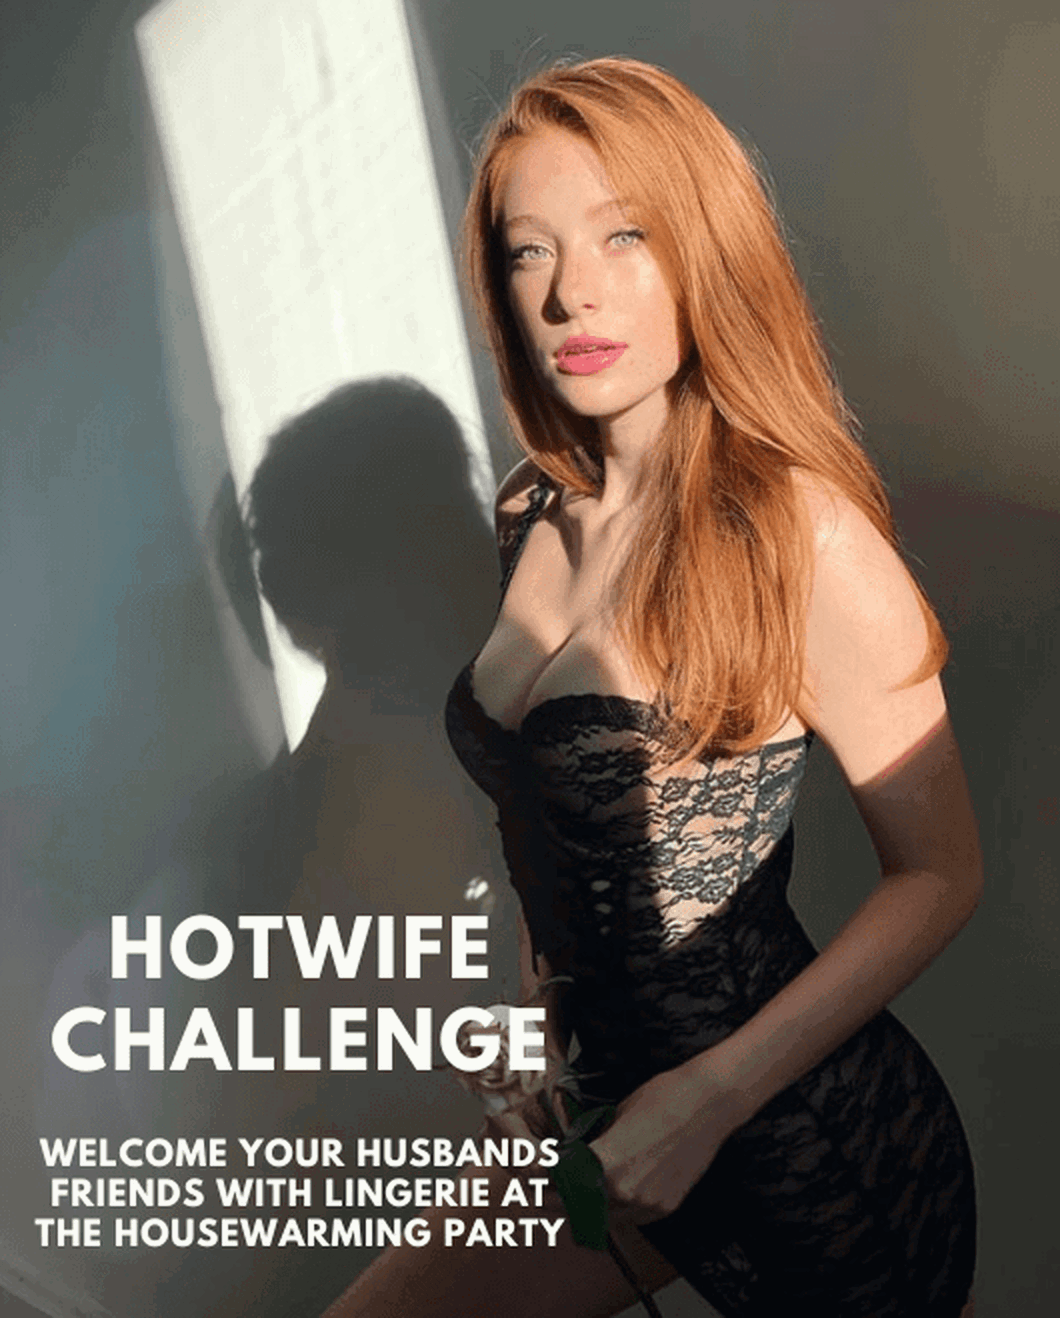 Watch the Photo by Capmob with the username @Capmob, posted on September 9, 2023. The post is about the topic Cuckold Captions. and the text says 'Hotwife challenge'